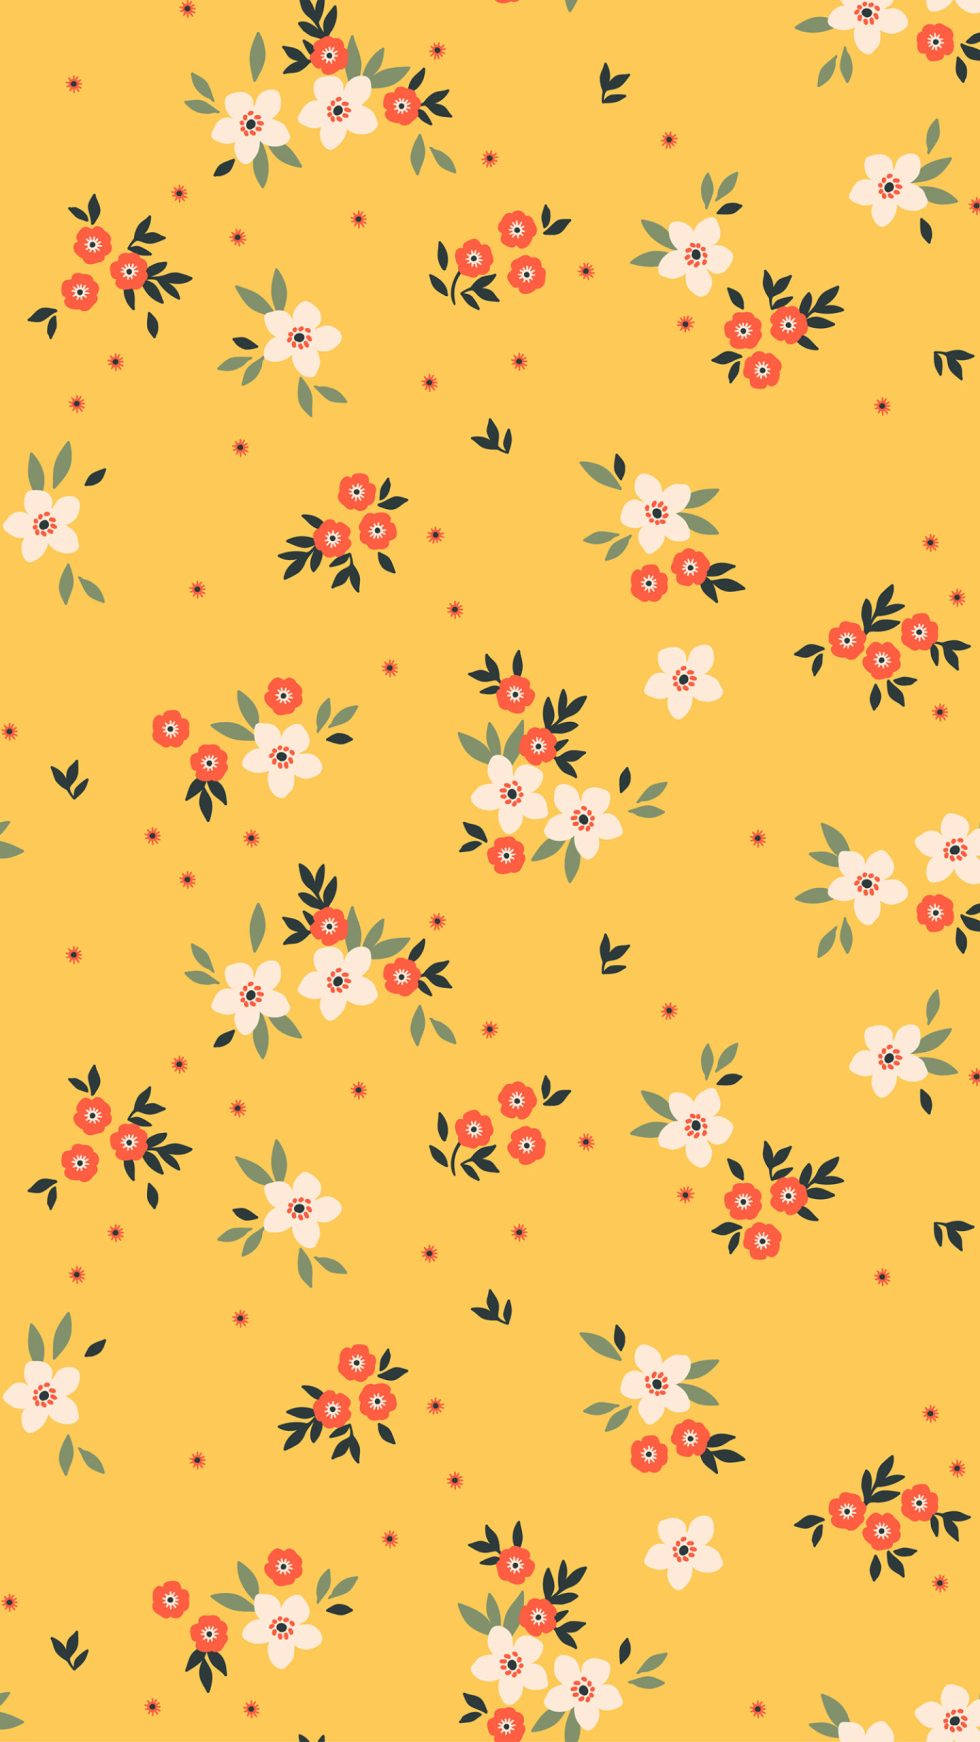 Bringing A Cheerful Touch To Your Day With This Cute Yellow Aesthetic. Background